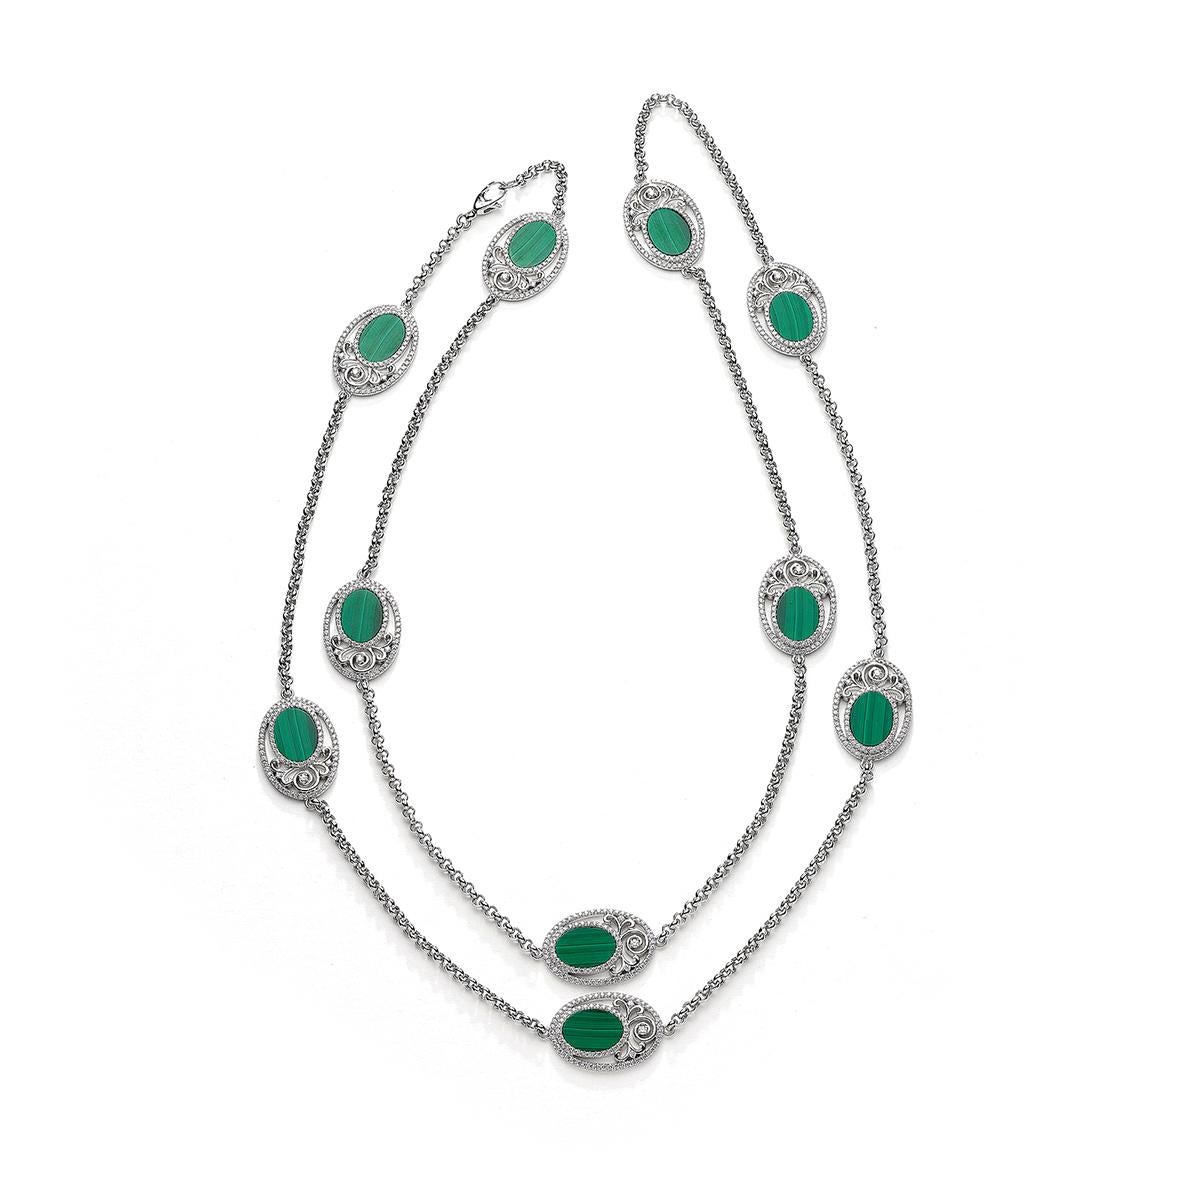 Necklace in 18kt white gold set with 850 diamonds 5.62 cts and 10 malachites 31.02 cts